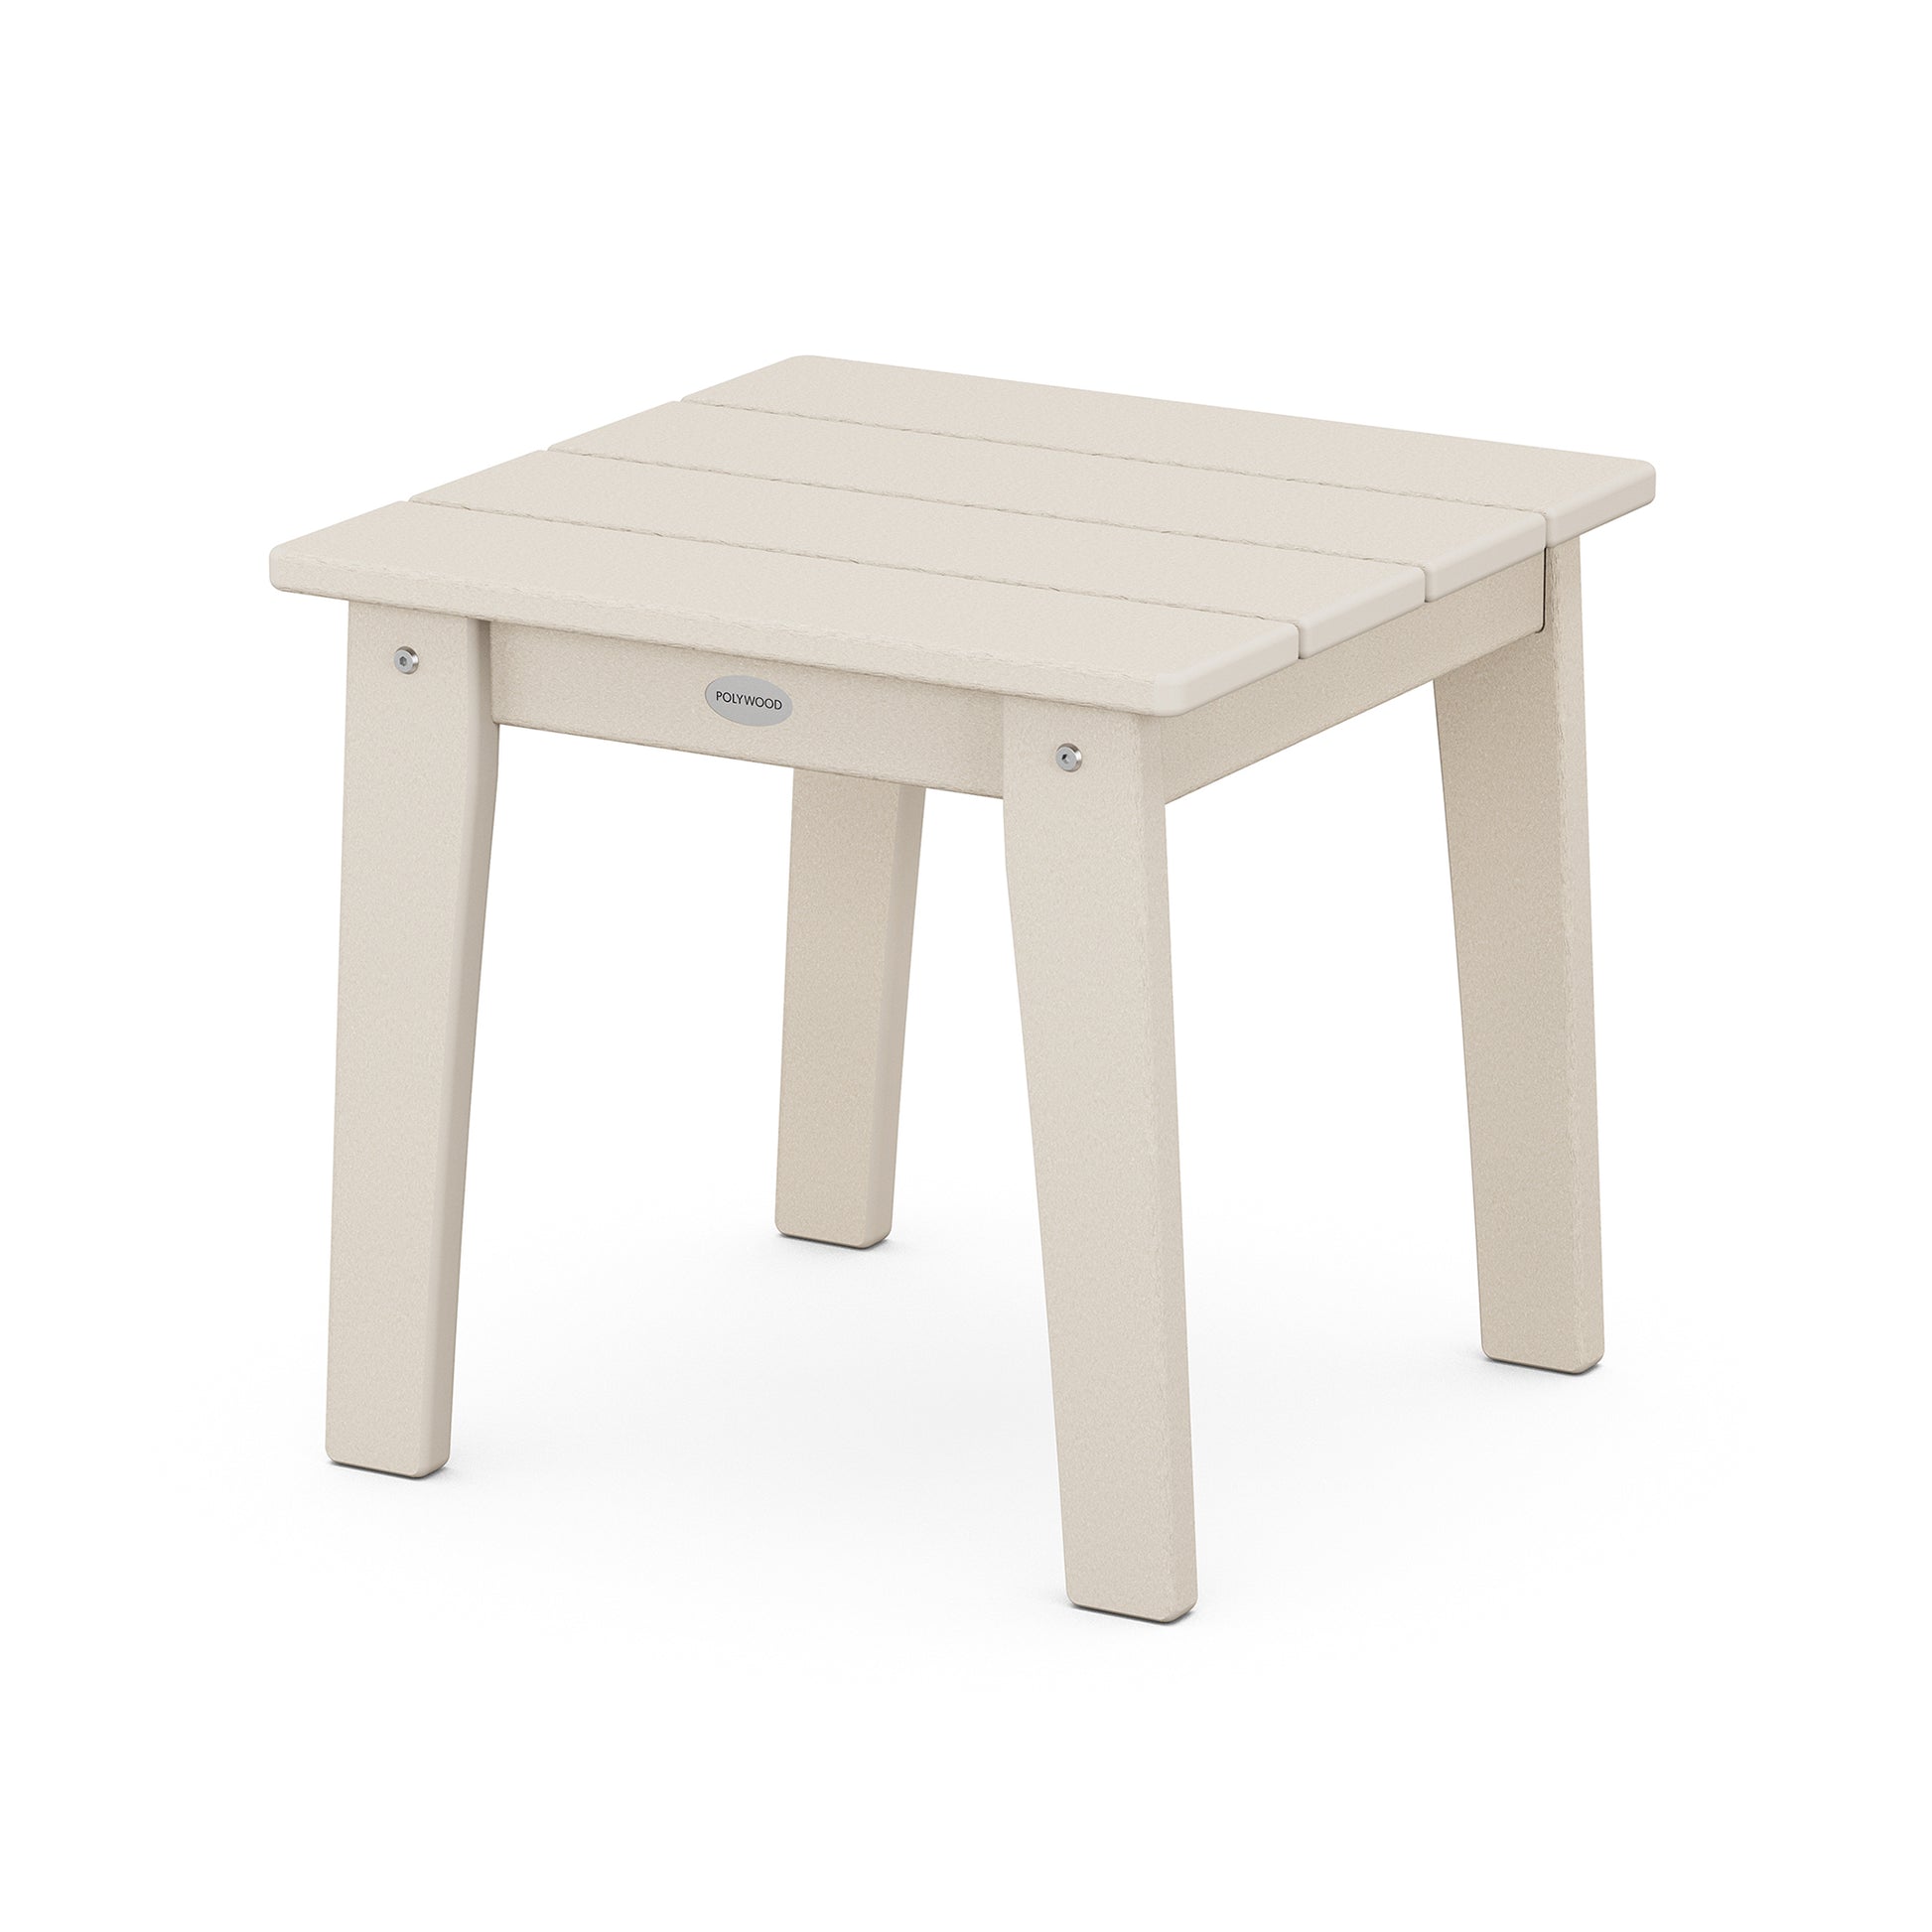 A simple beige POLYWOOD Lakeside 18" End Table with a rectangular top and four legs, isolated on a white background. The stool features visible screws at the joints and a small label on one side.